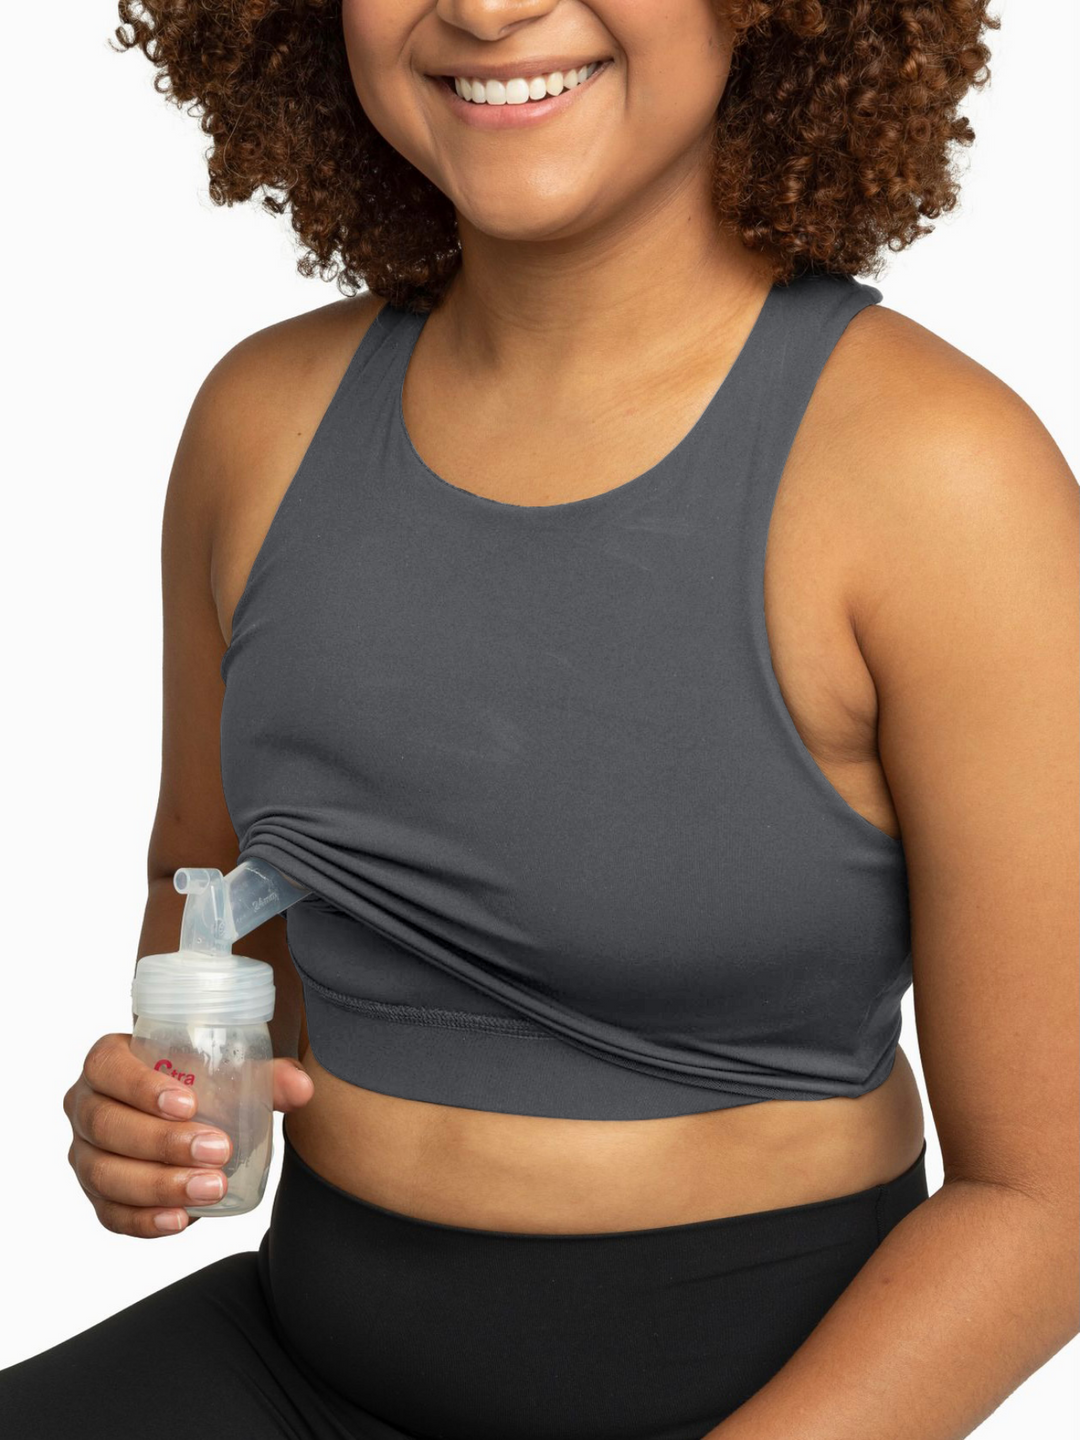 Charcoal high impact nursing and hands-free pumping sports bra without clips